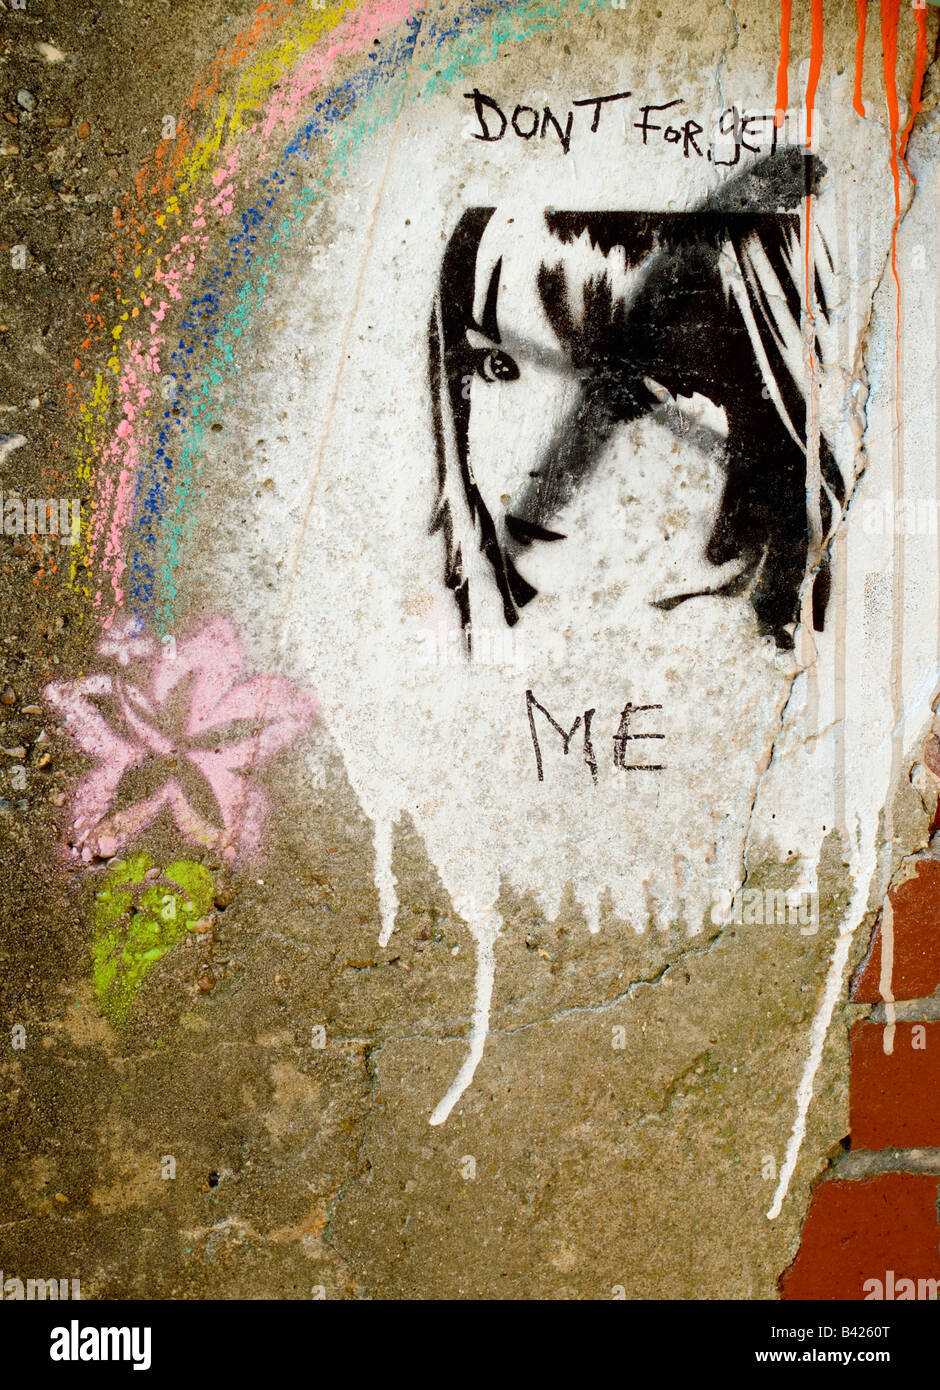 A stencil graffito shows the face of Madeleine McCann with the words 'DONT FORGET ME' added. Stock Photo